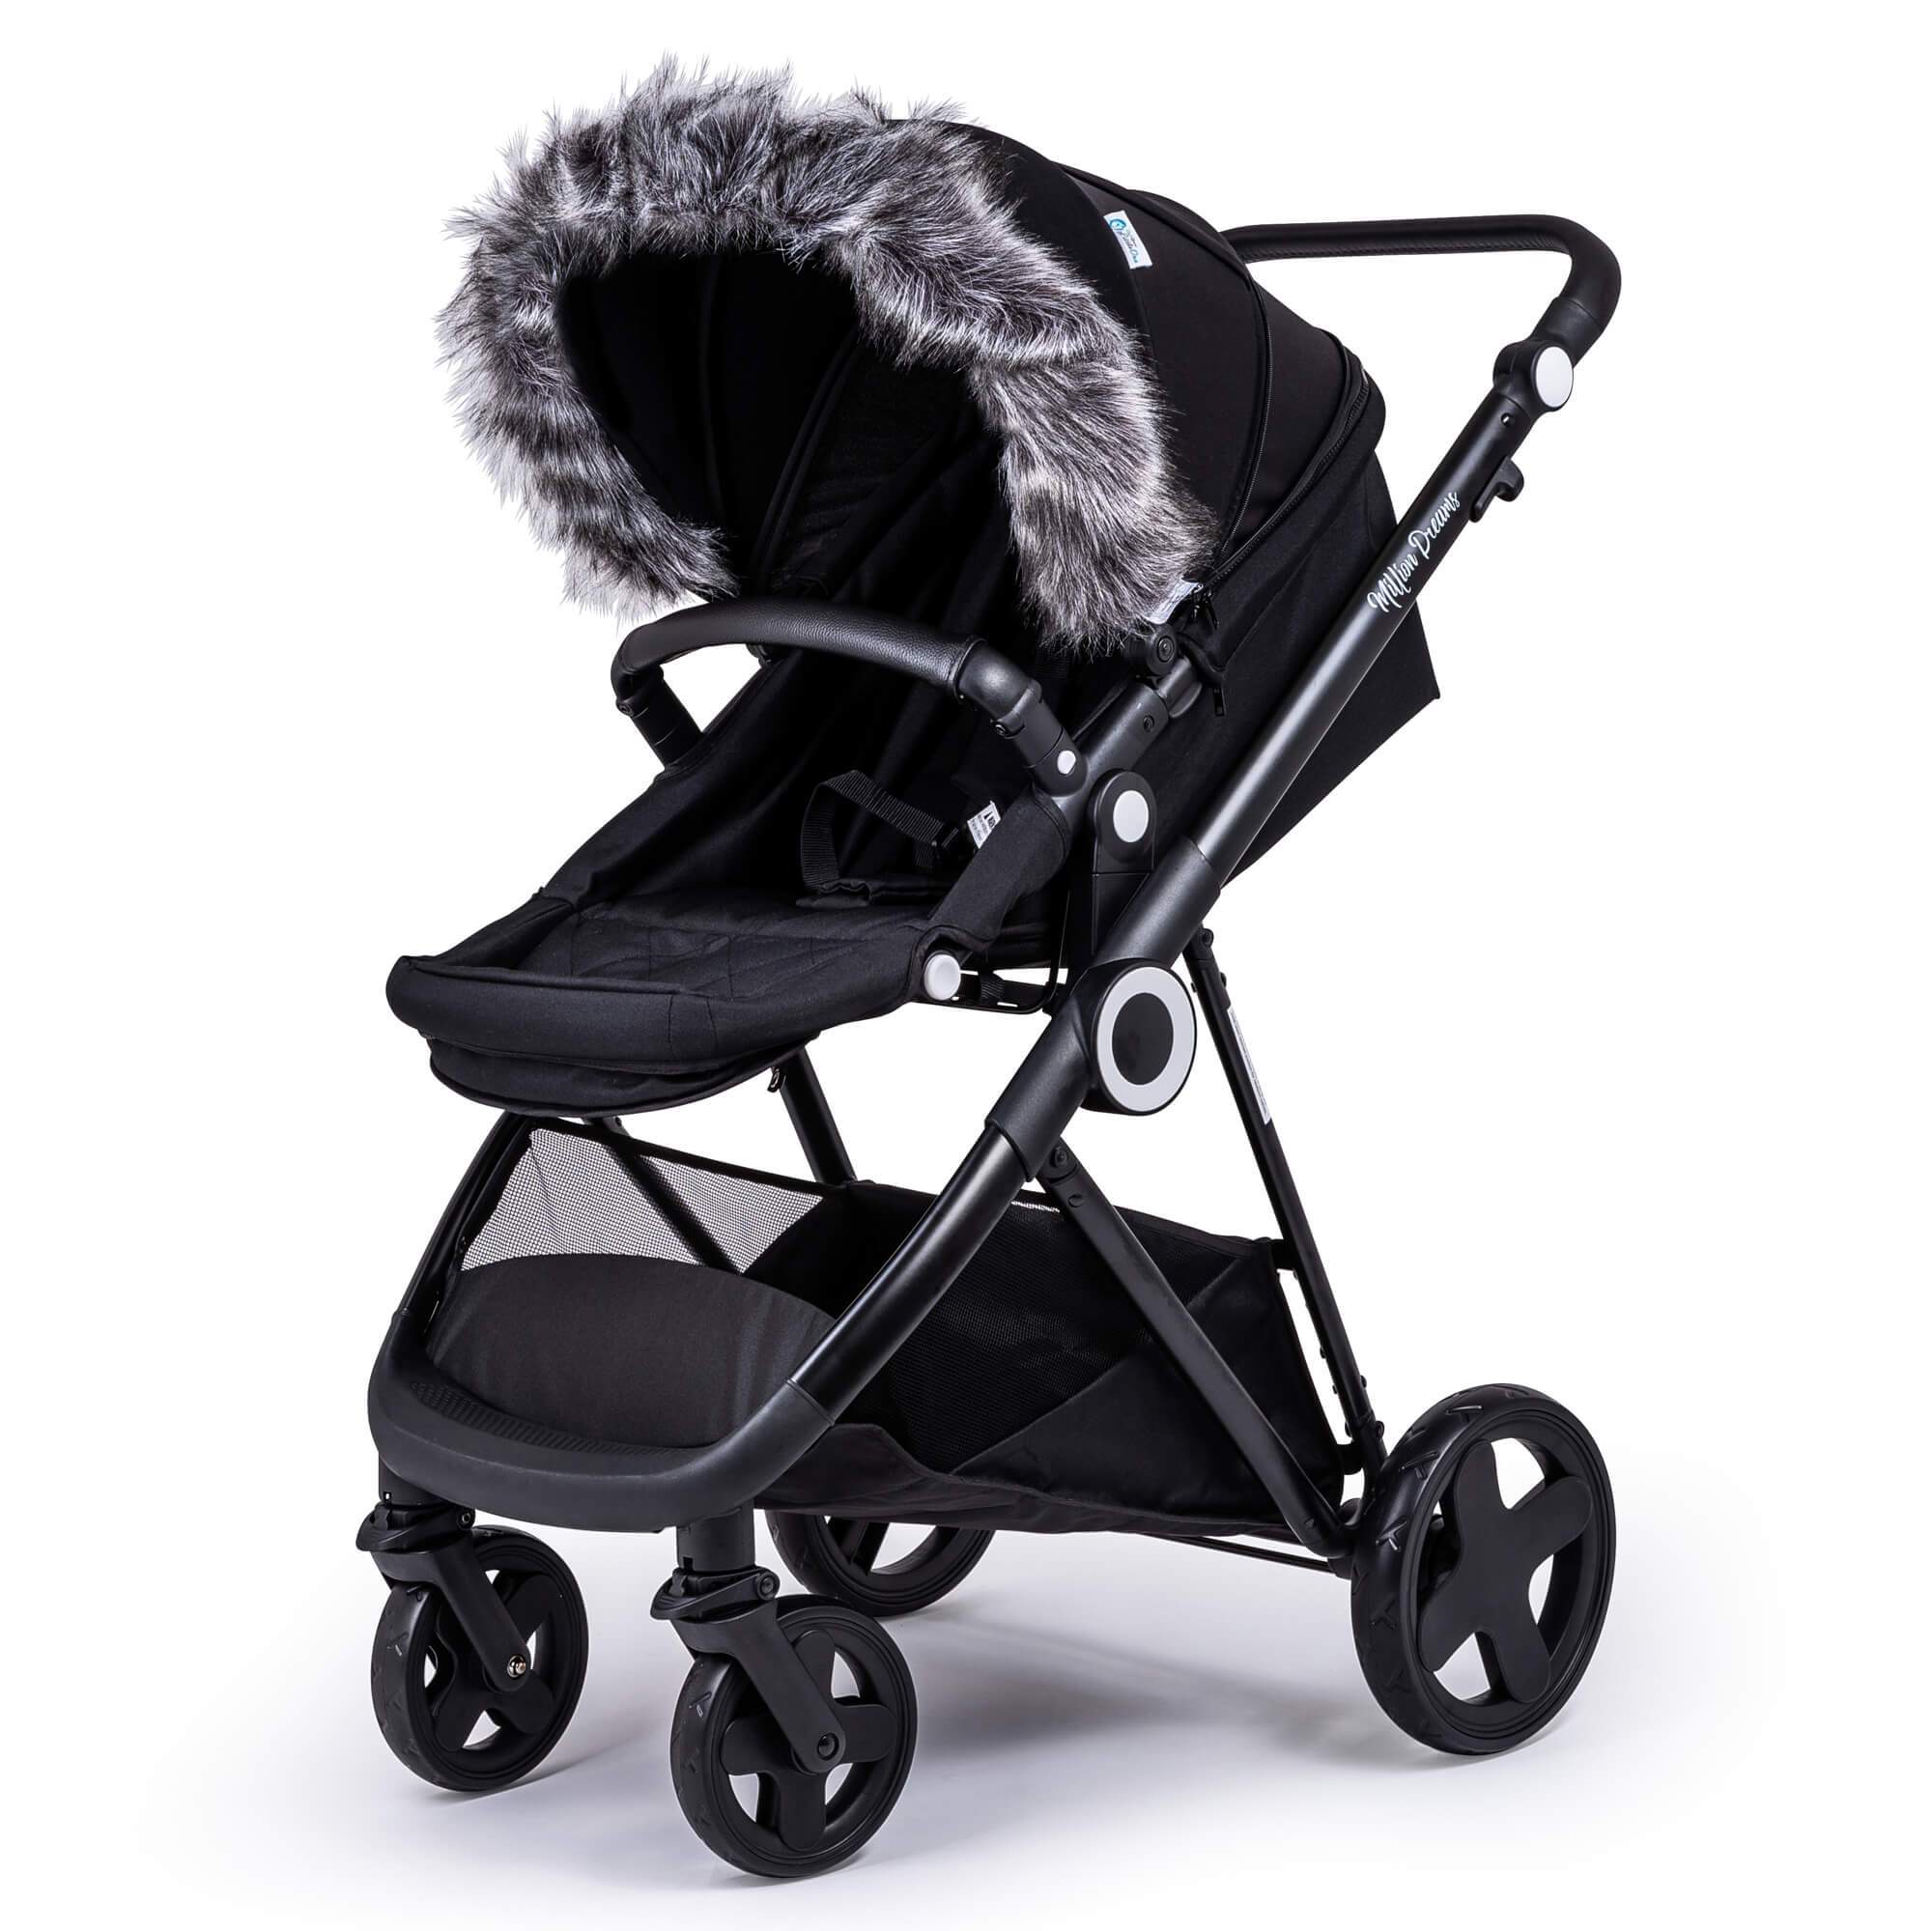 Pram Fur Hood Trim Attachment for Pushchair Compatible with My Babiie - For Your Little One